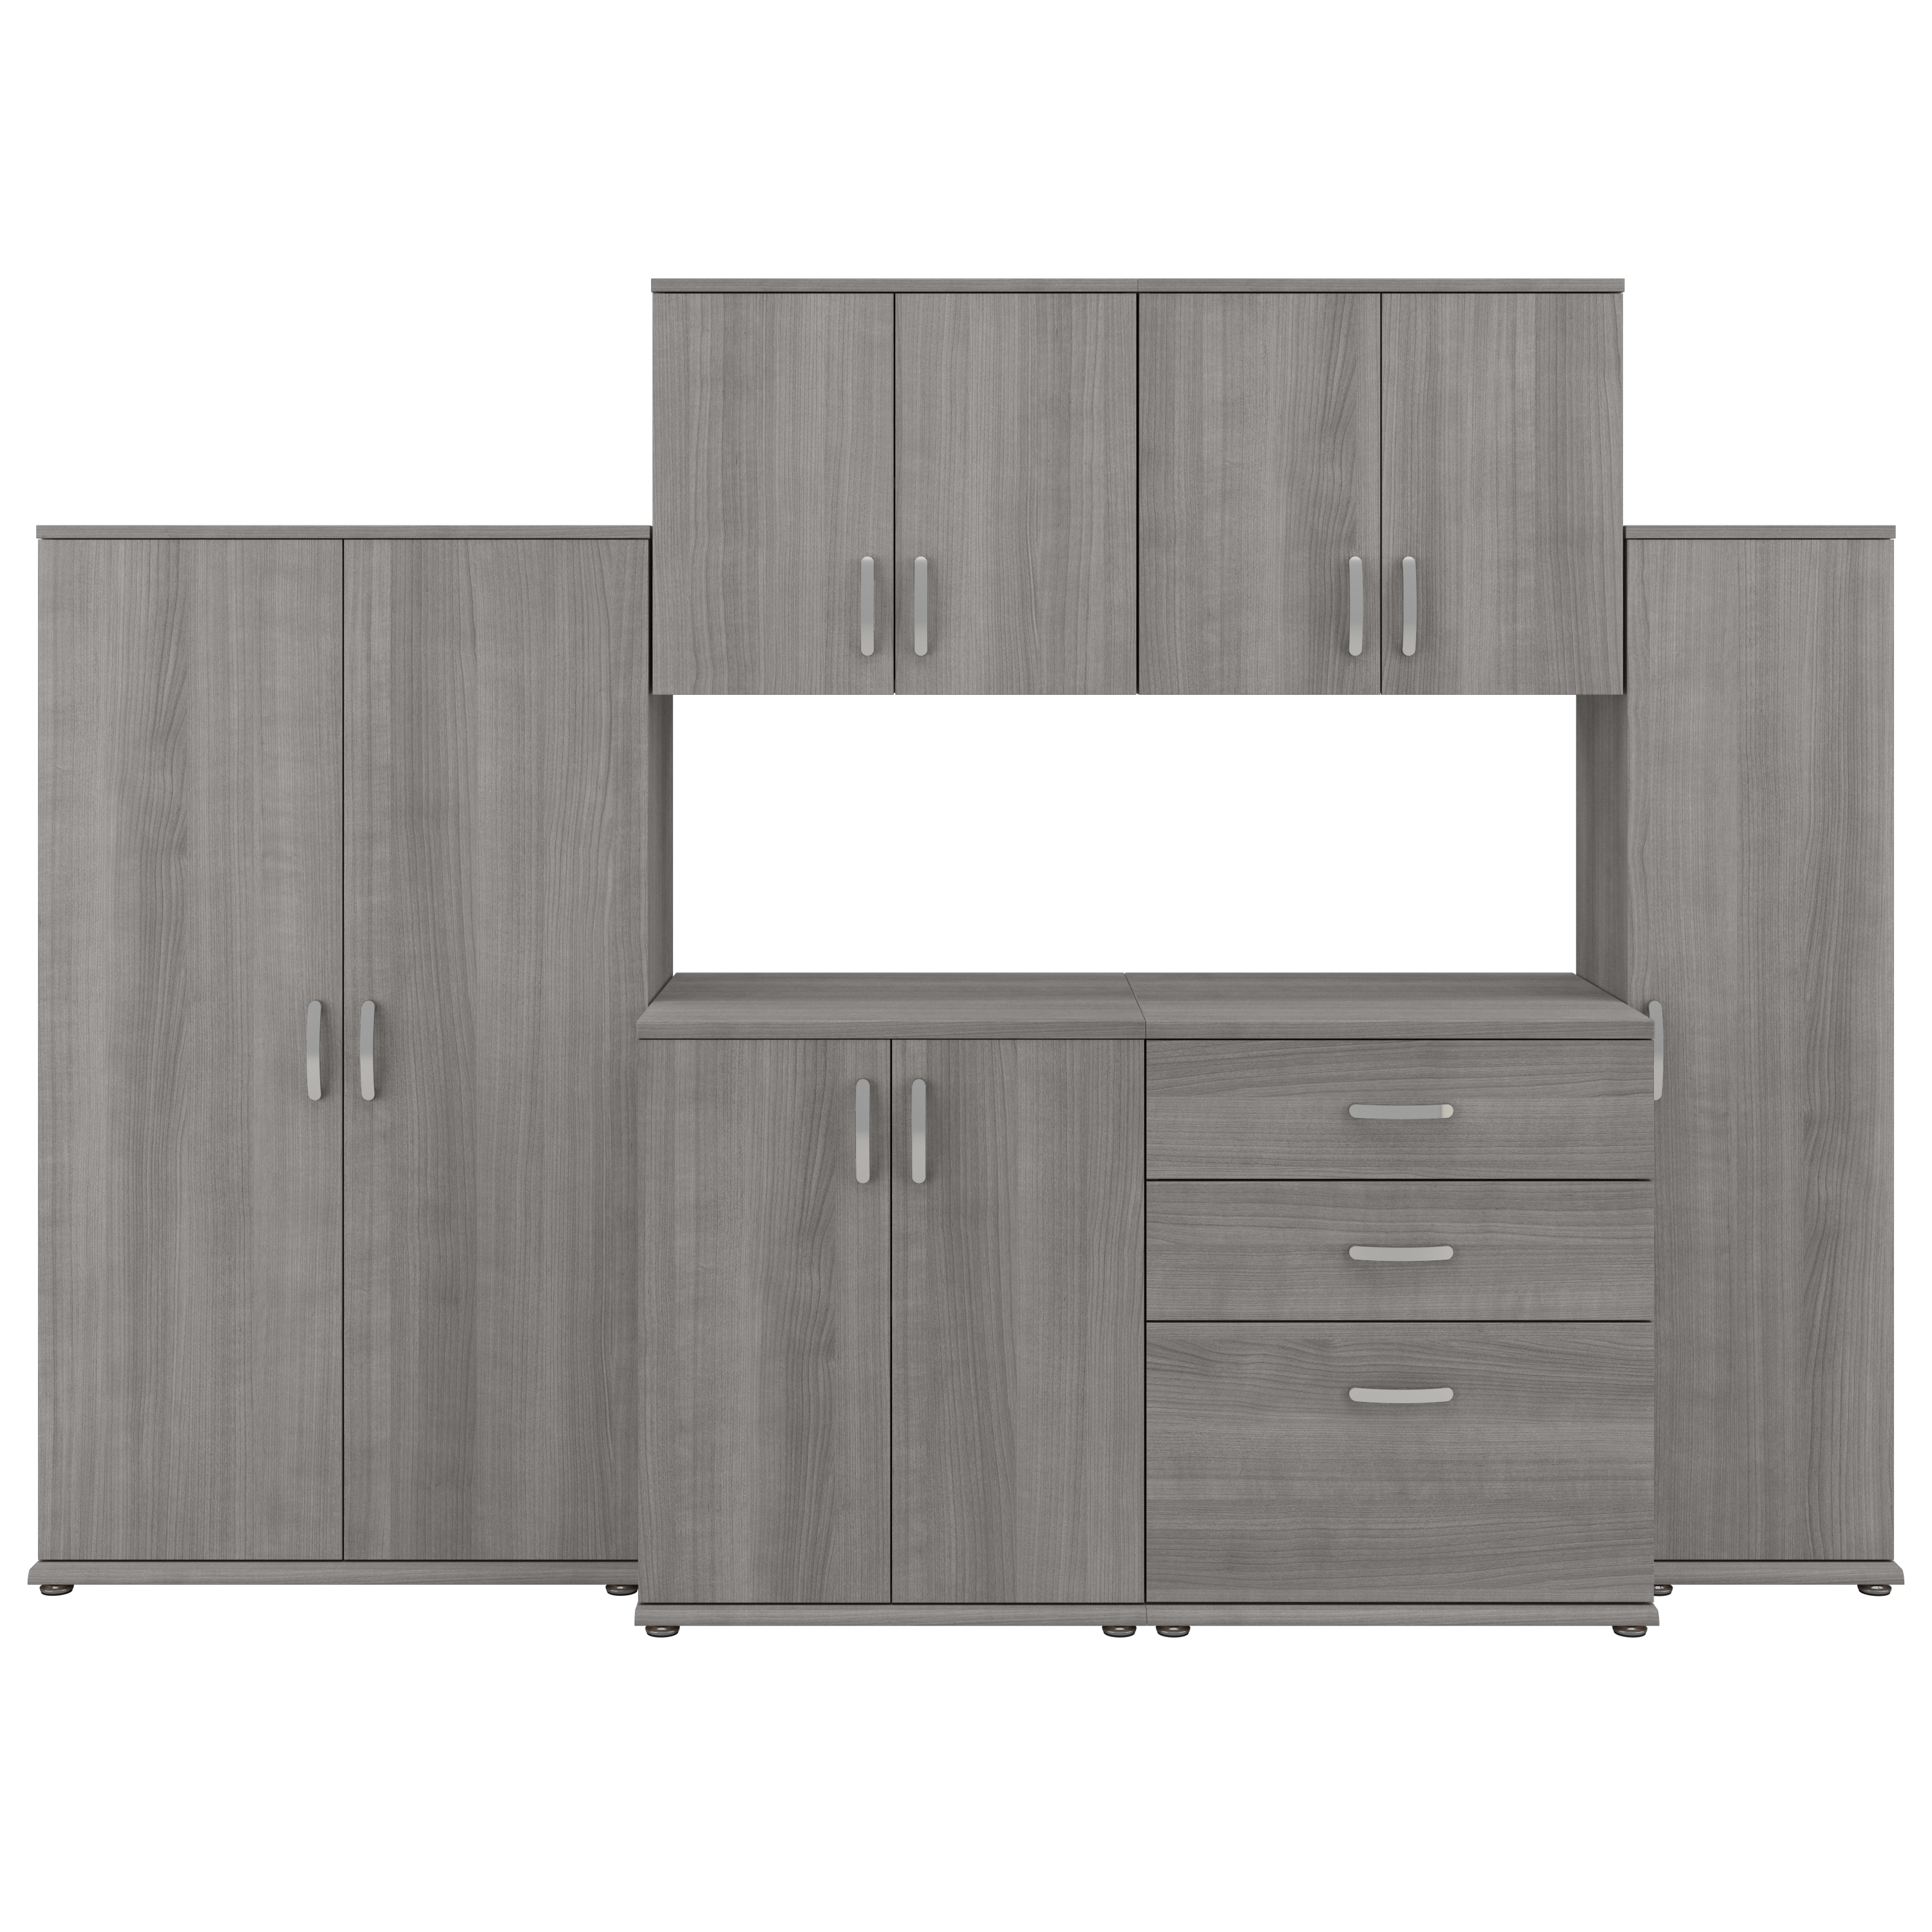 Shop Bush Business Furniture Universal 6 Piece Modular Closet Storage Set with Floor and Wall Cabinets 02 CLS002PG #color_platinum gray